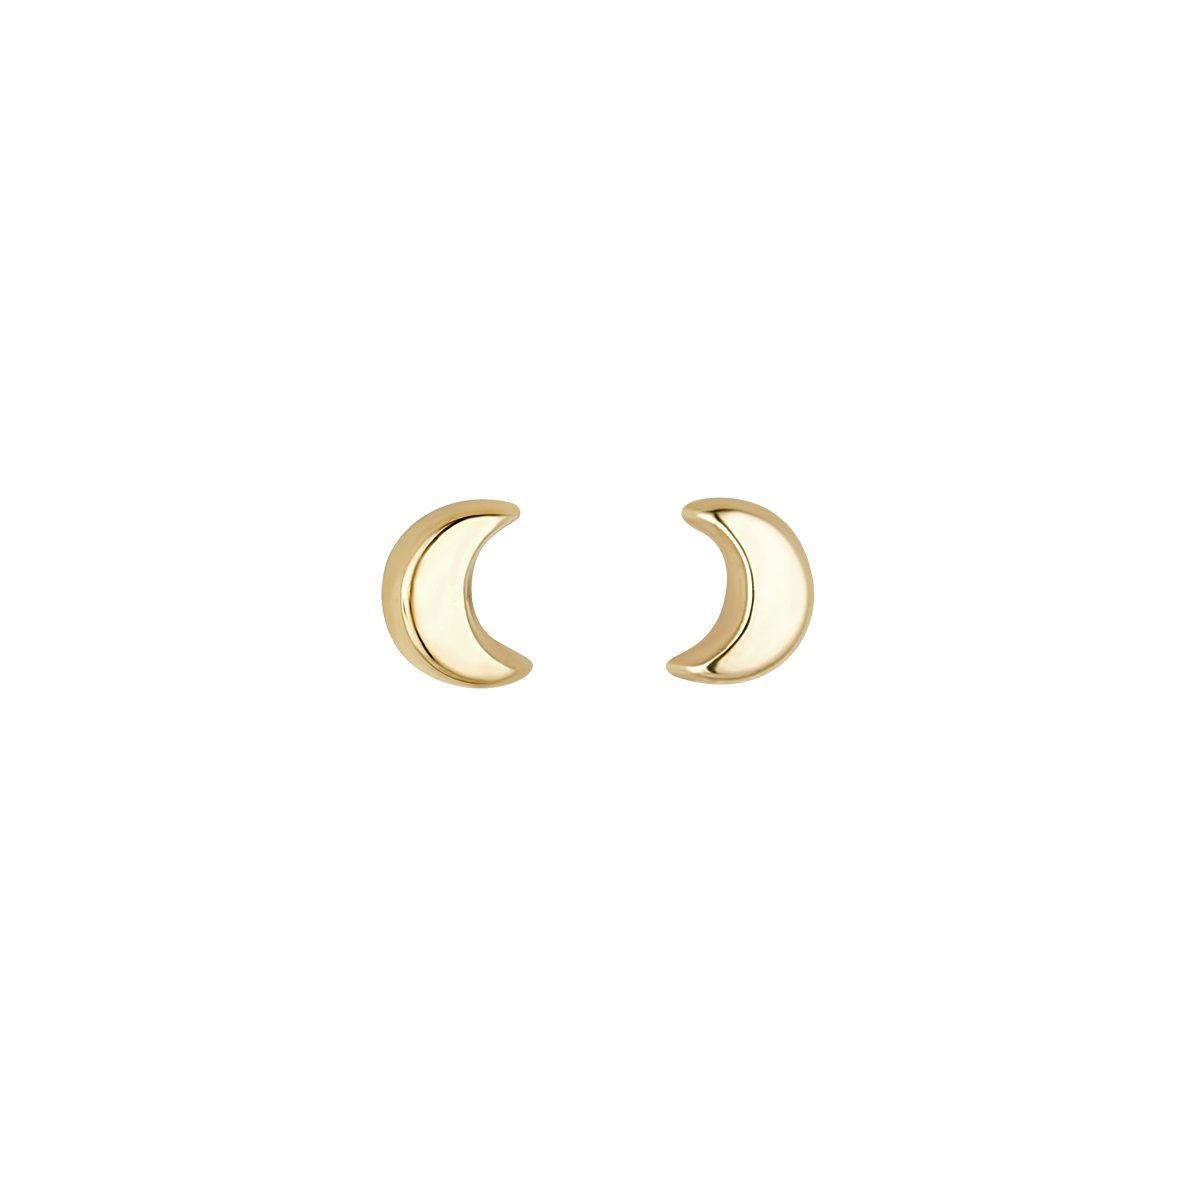 GOLD MOON STUD EARRINGS - A & M News and Gifts